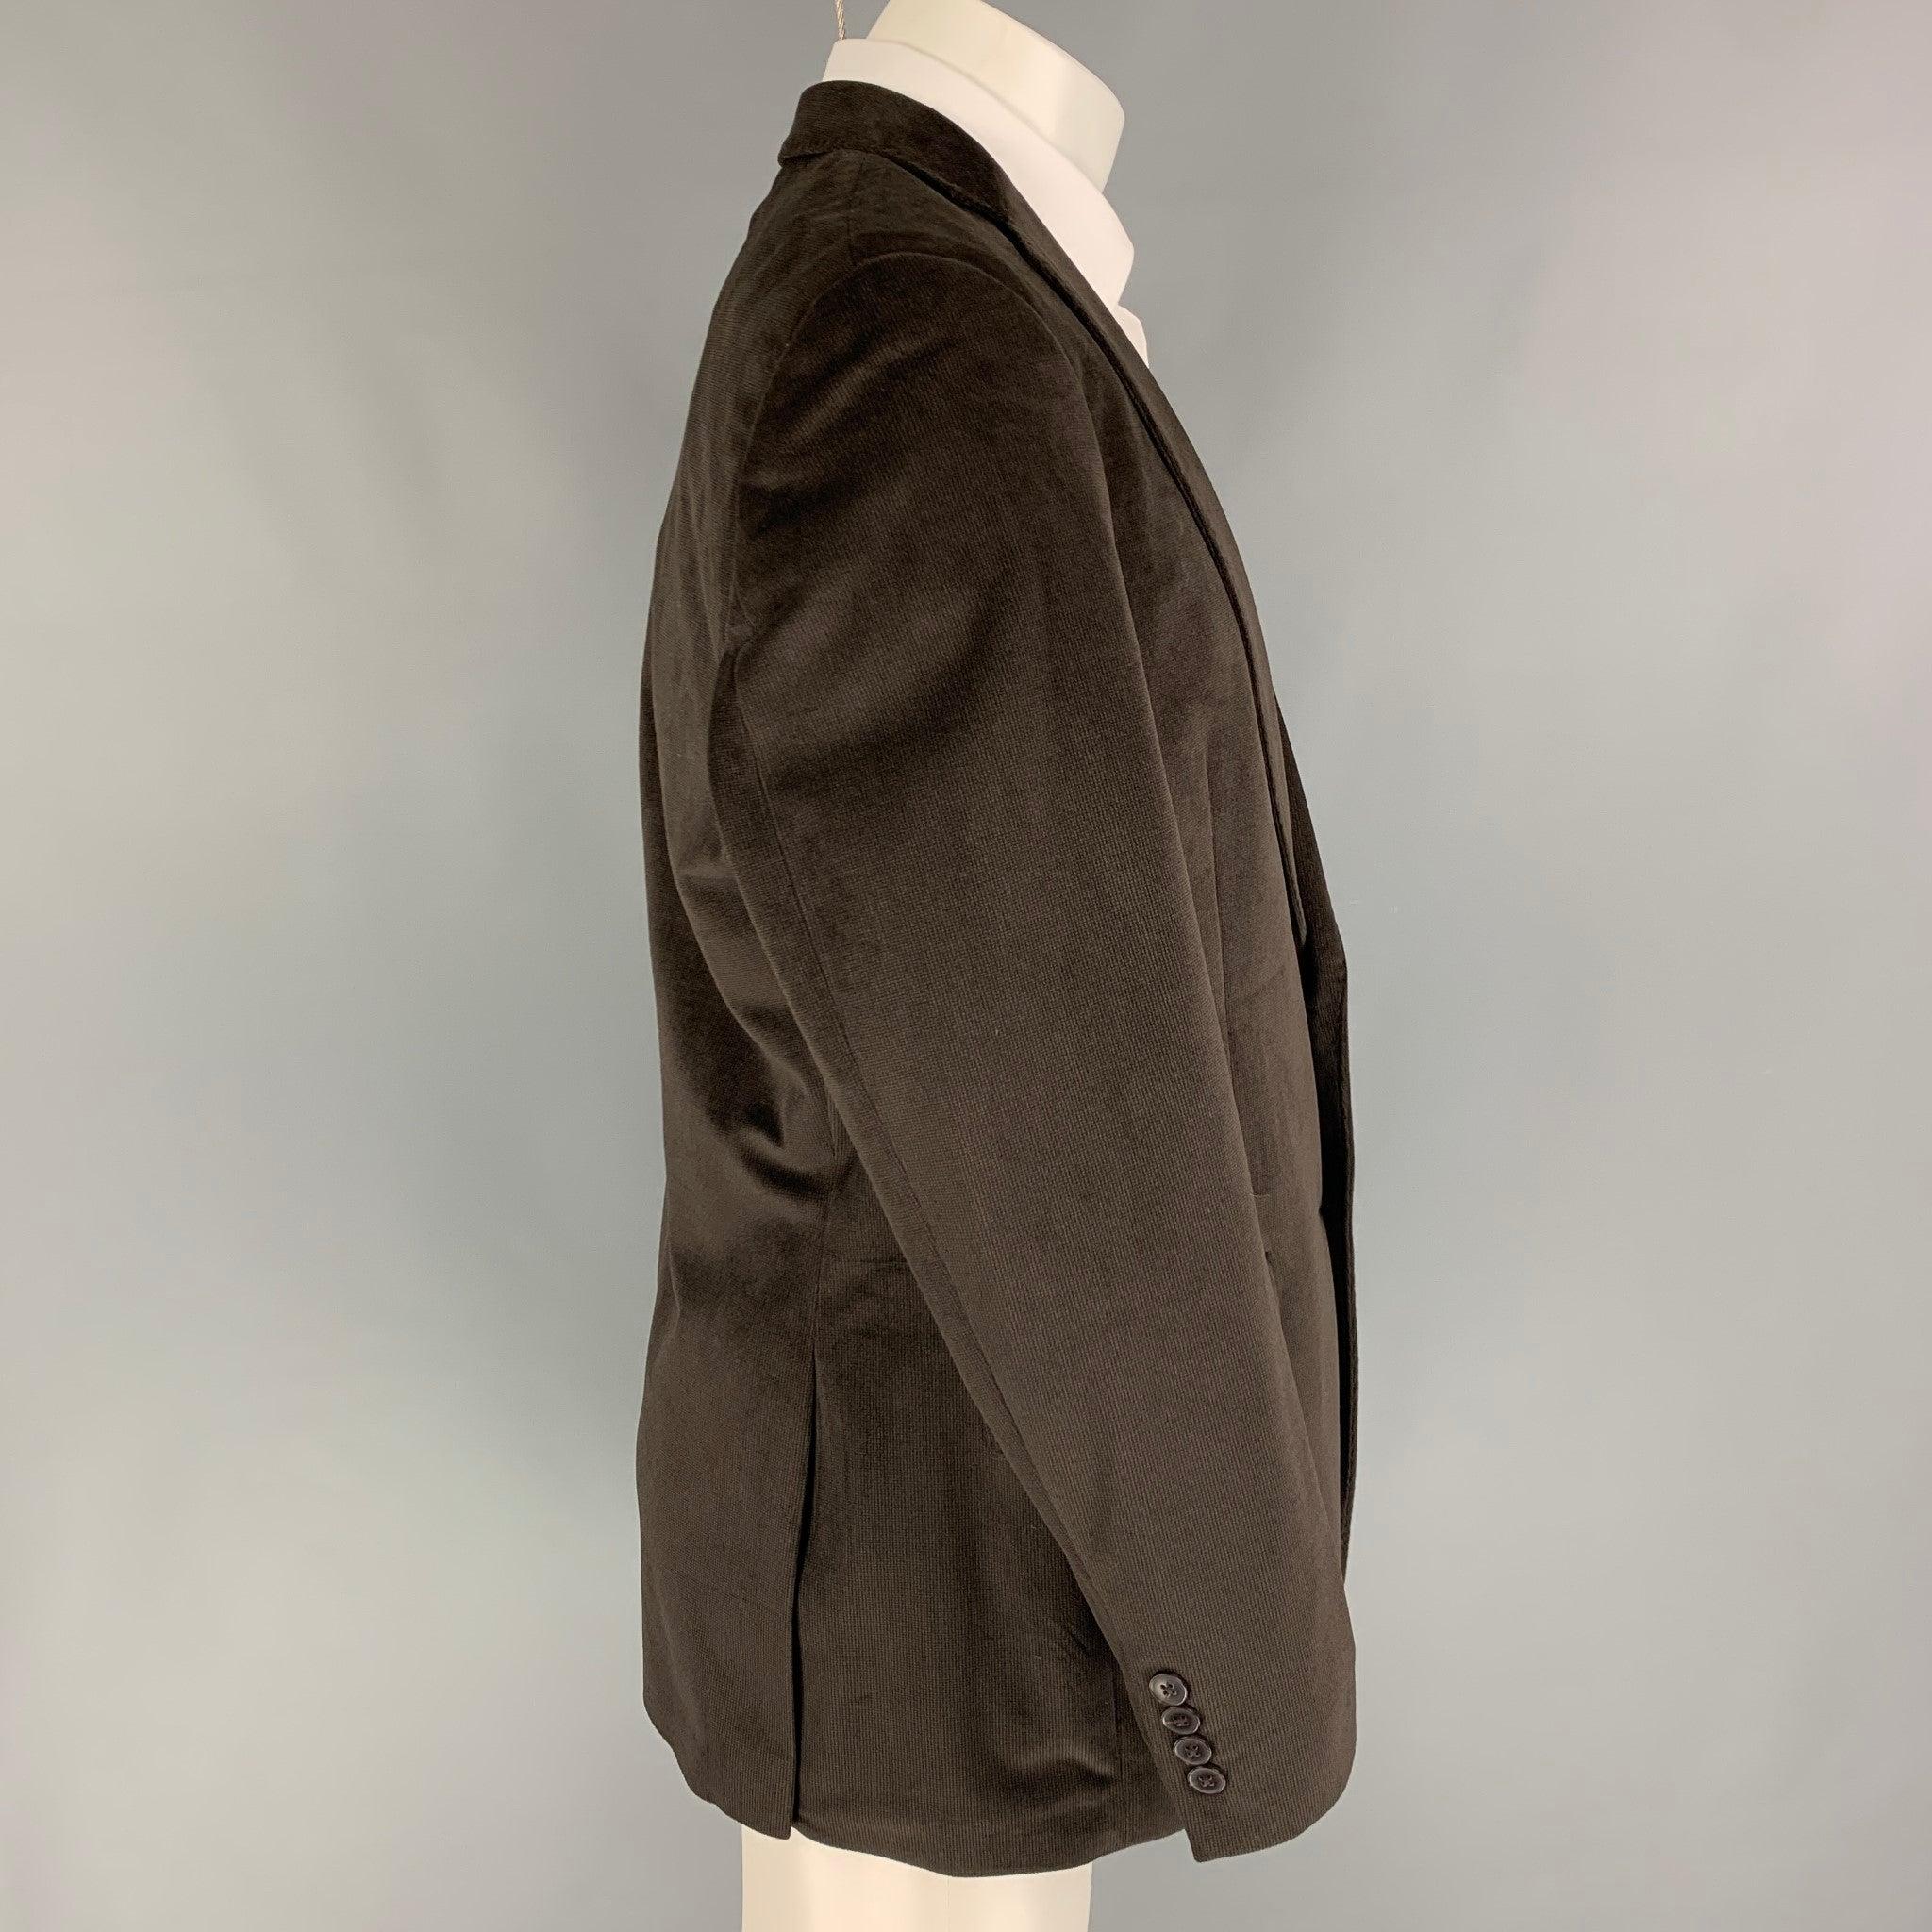 CALVIN KLEIN sport coat comes in a black polyester velvet with a full liner featuring a notch lapel, flap pockets, double back vent, and a double button closure.
Very Good
Pre-Owned Condition. 

Marked:   40 R  

Measurements: 
 
Shoulder: 19 inches